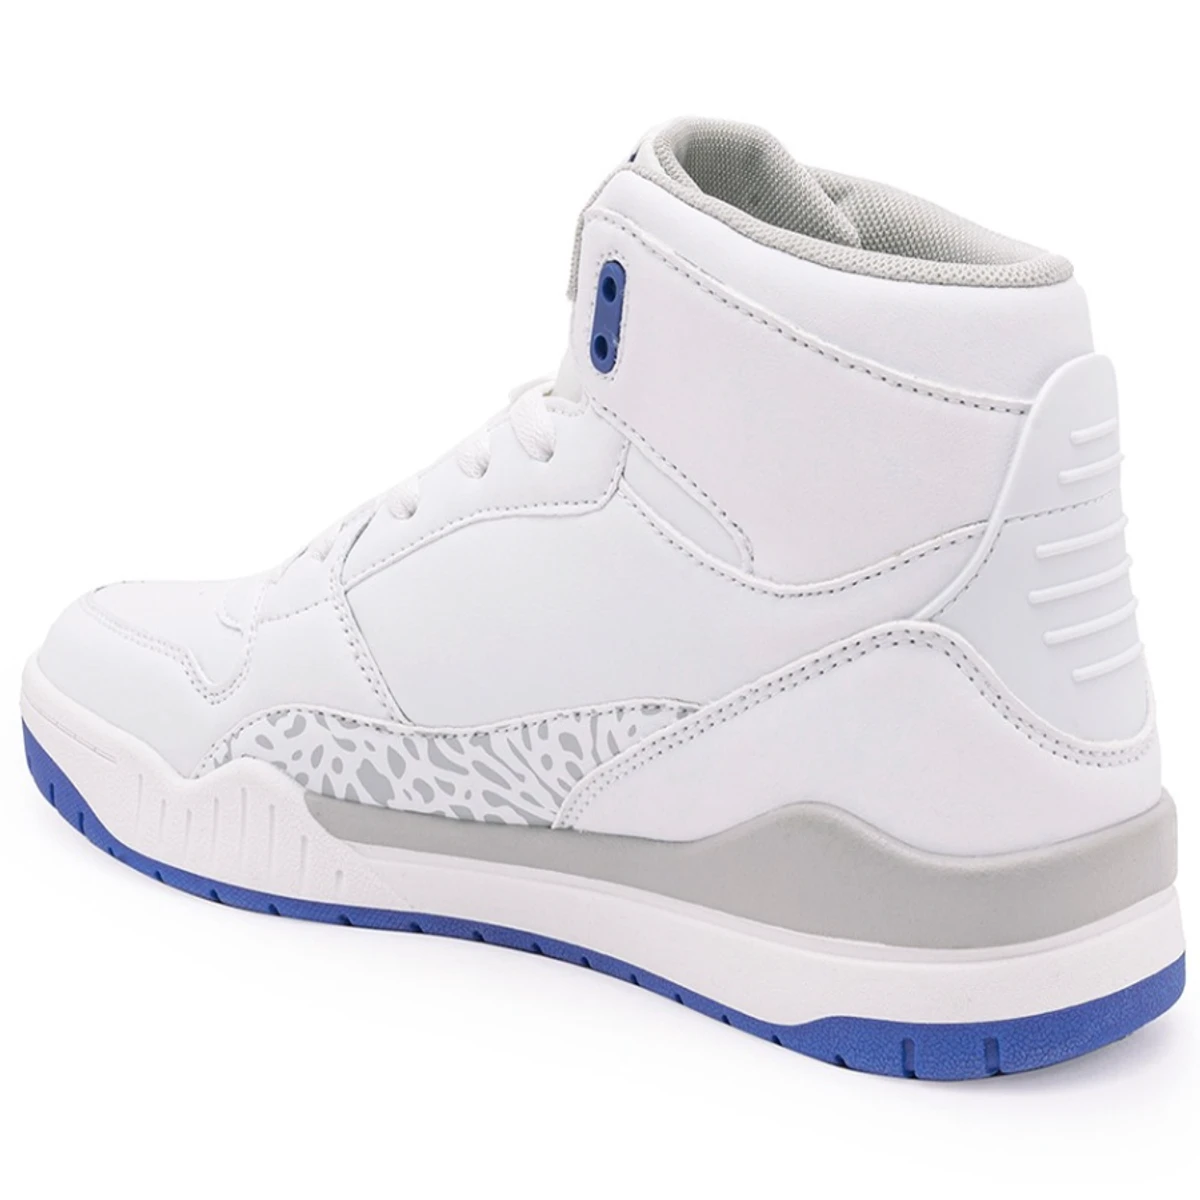 Red Tape RSL0315 PU Sneakers for Men - White and Blue